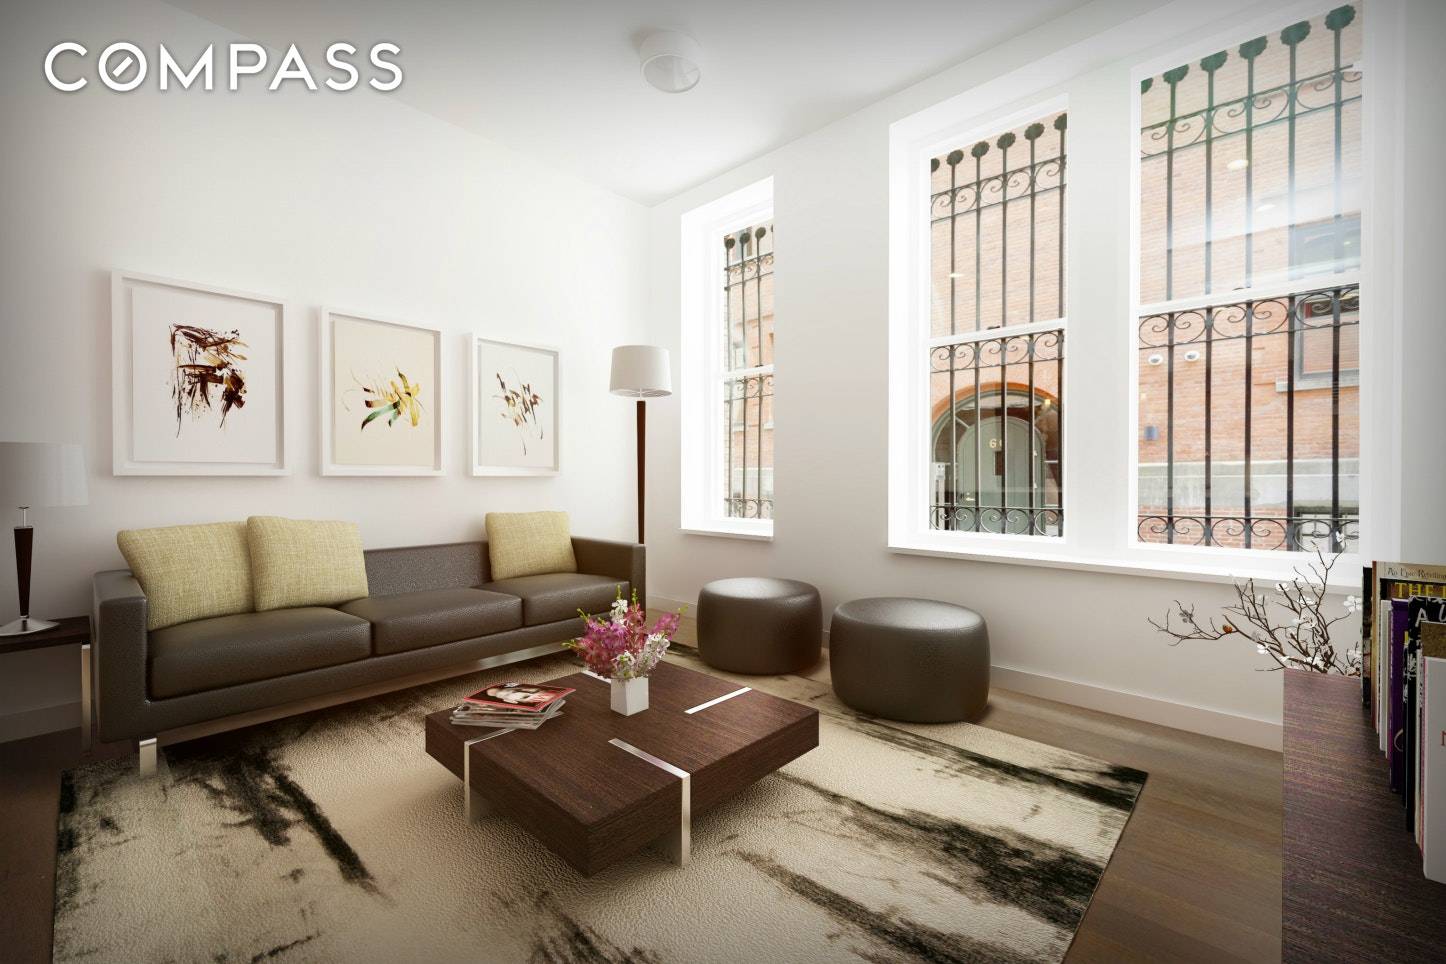 This dramatic and stylish home is a contemporary two bedroom set in an elite, newly restored prewar building on a serene cobblestone street in the heart of Tribeca.